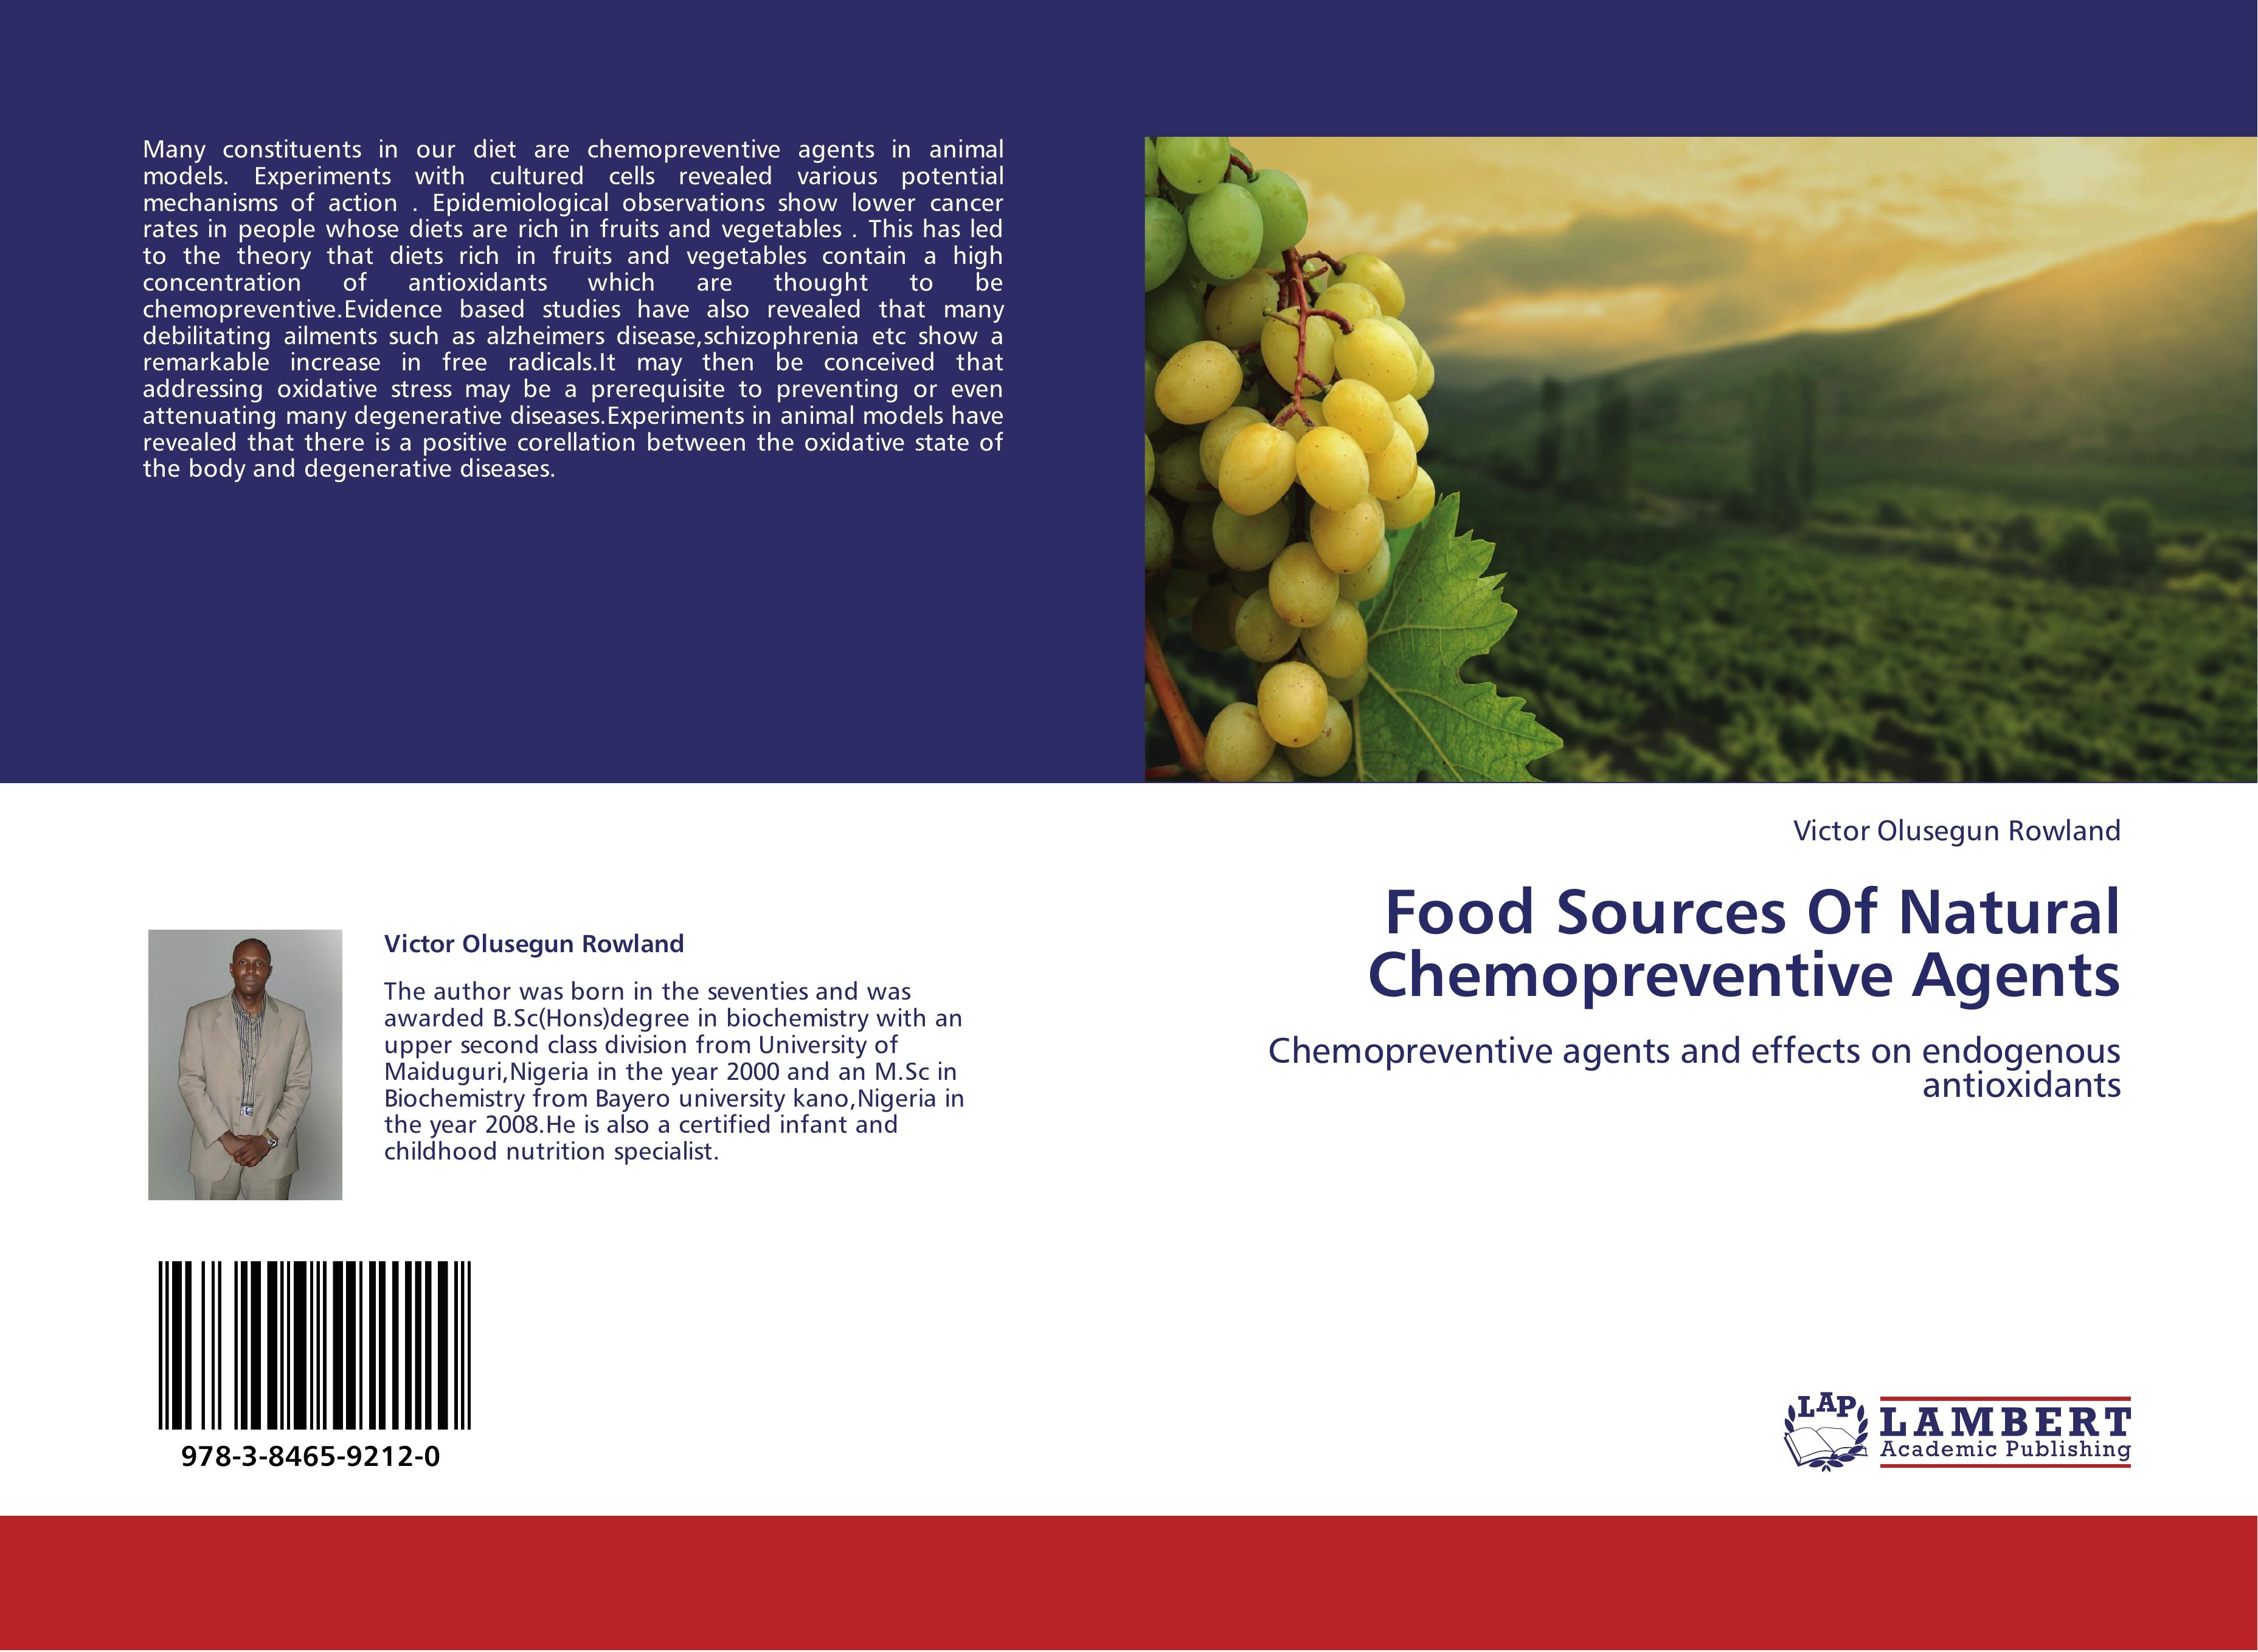 Food Sources Of Natural Chemopreventive Agents - Rowland, Victor Olusegun